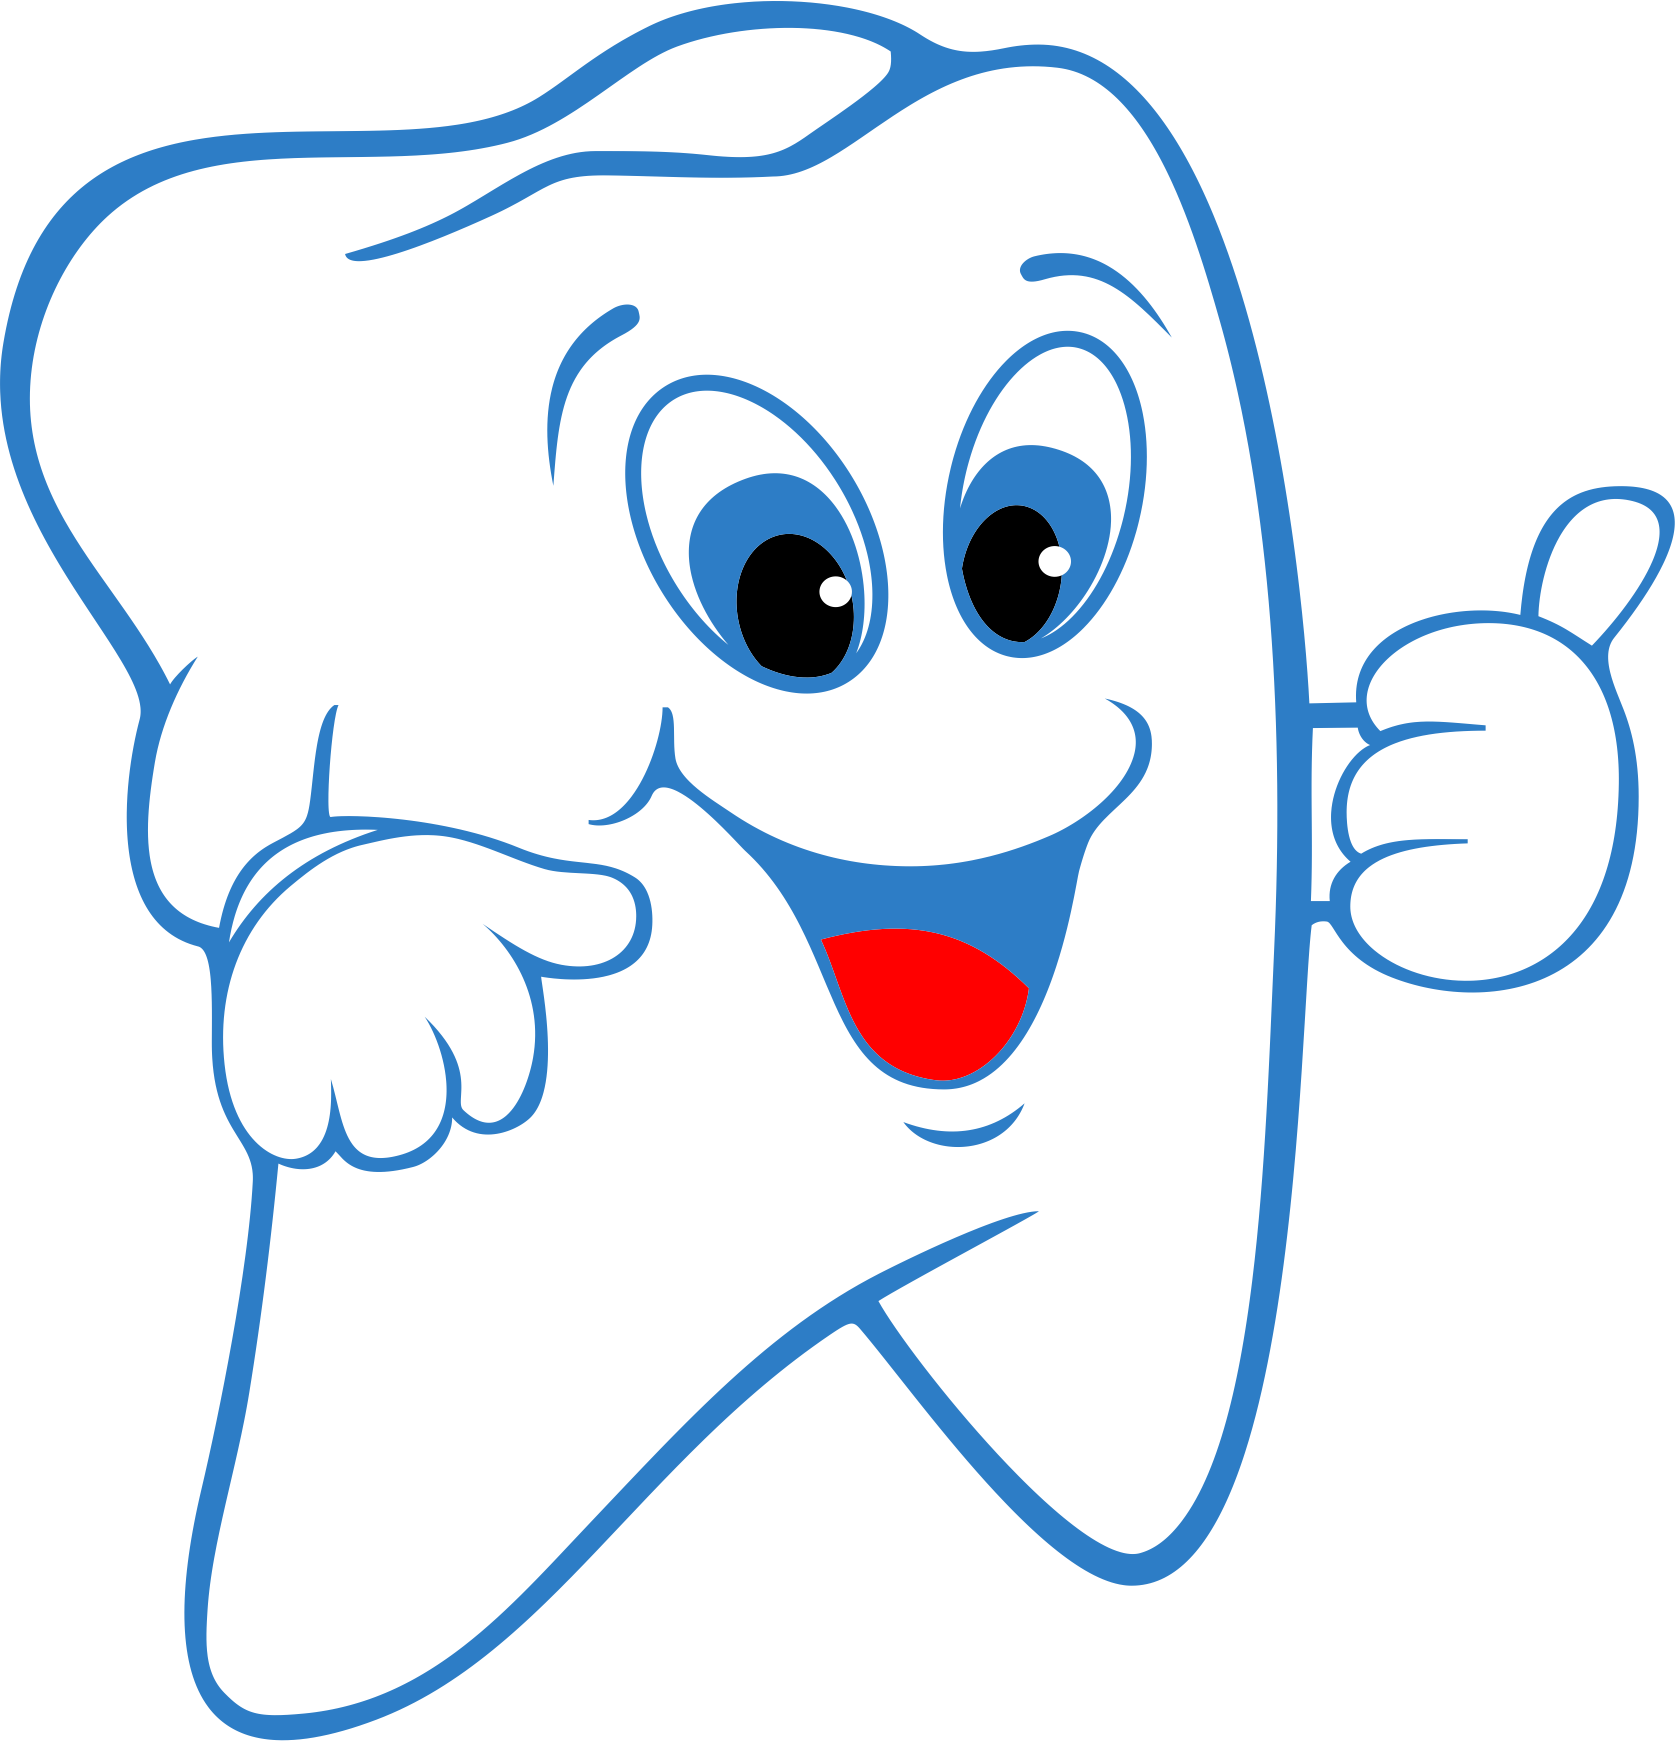 Tooth Clip Art - Images, Illustrations, Photos